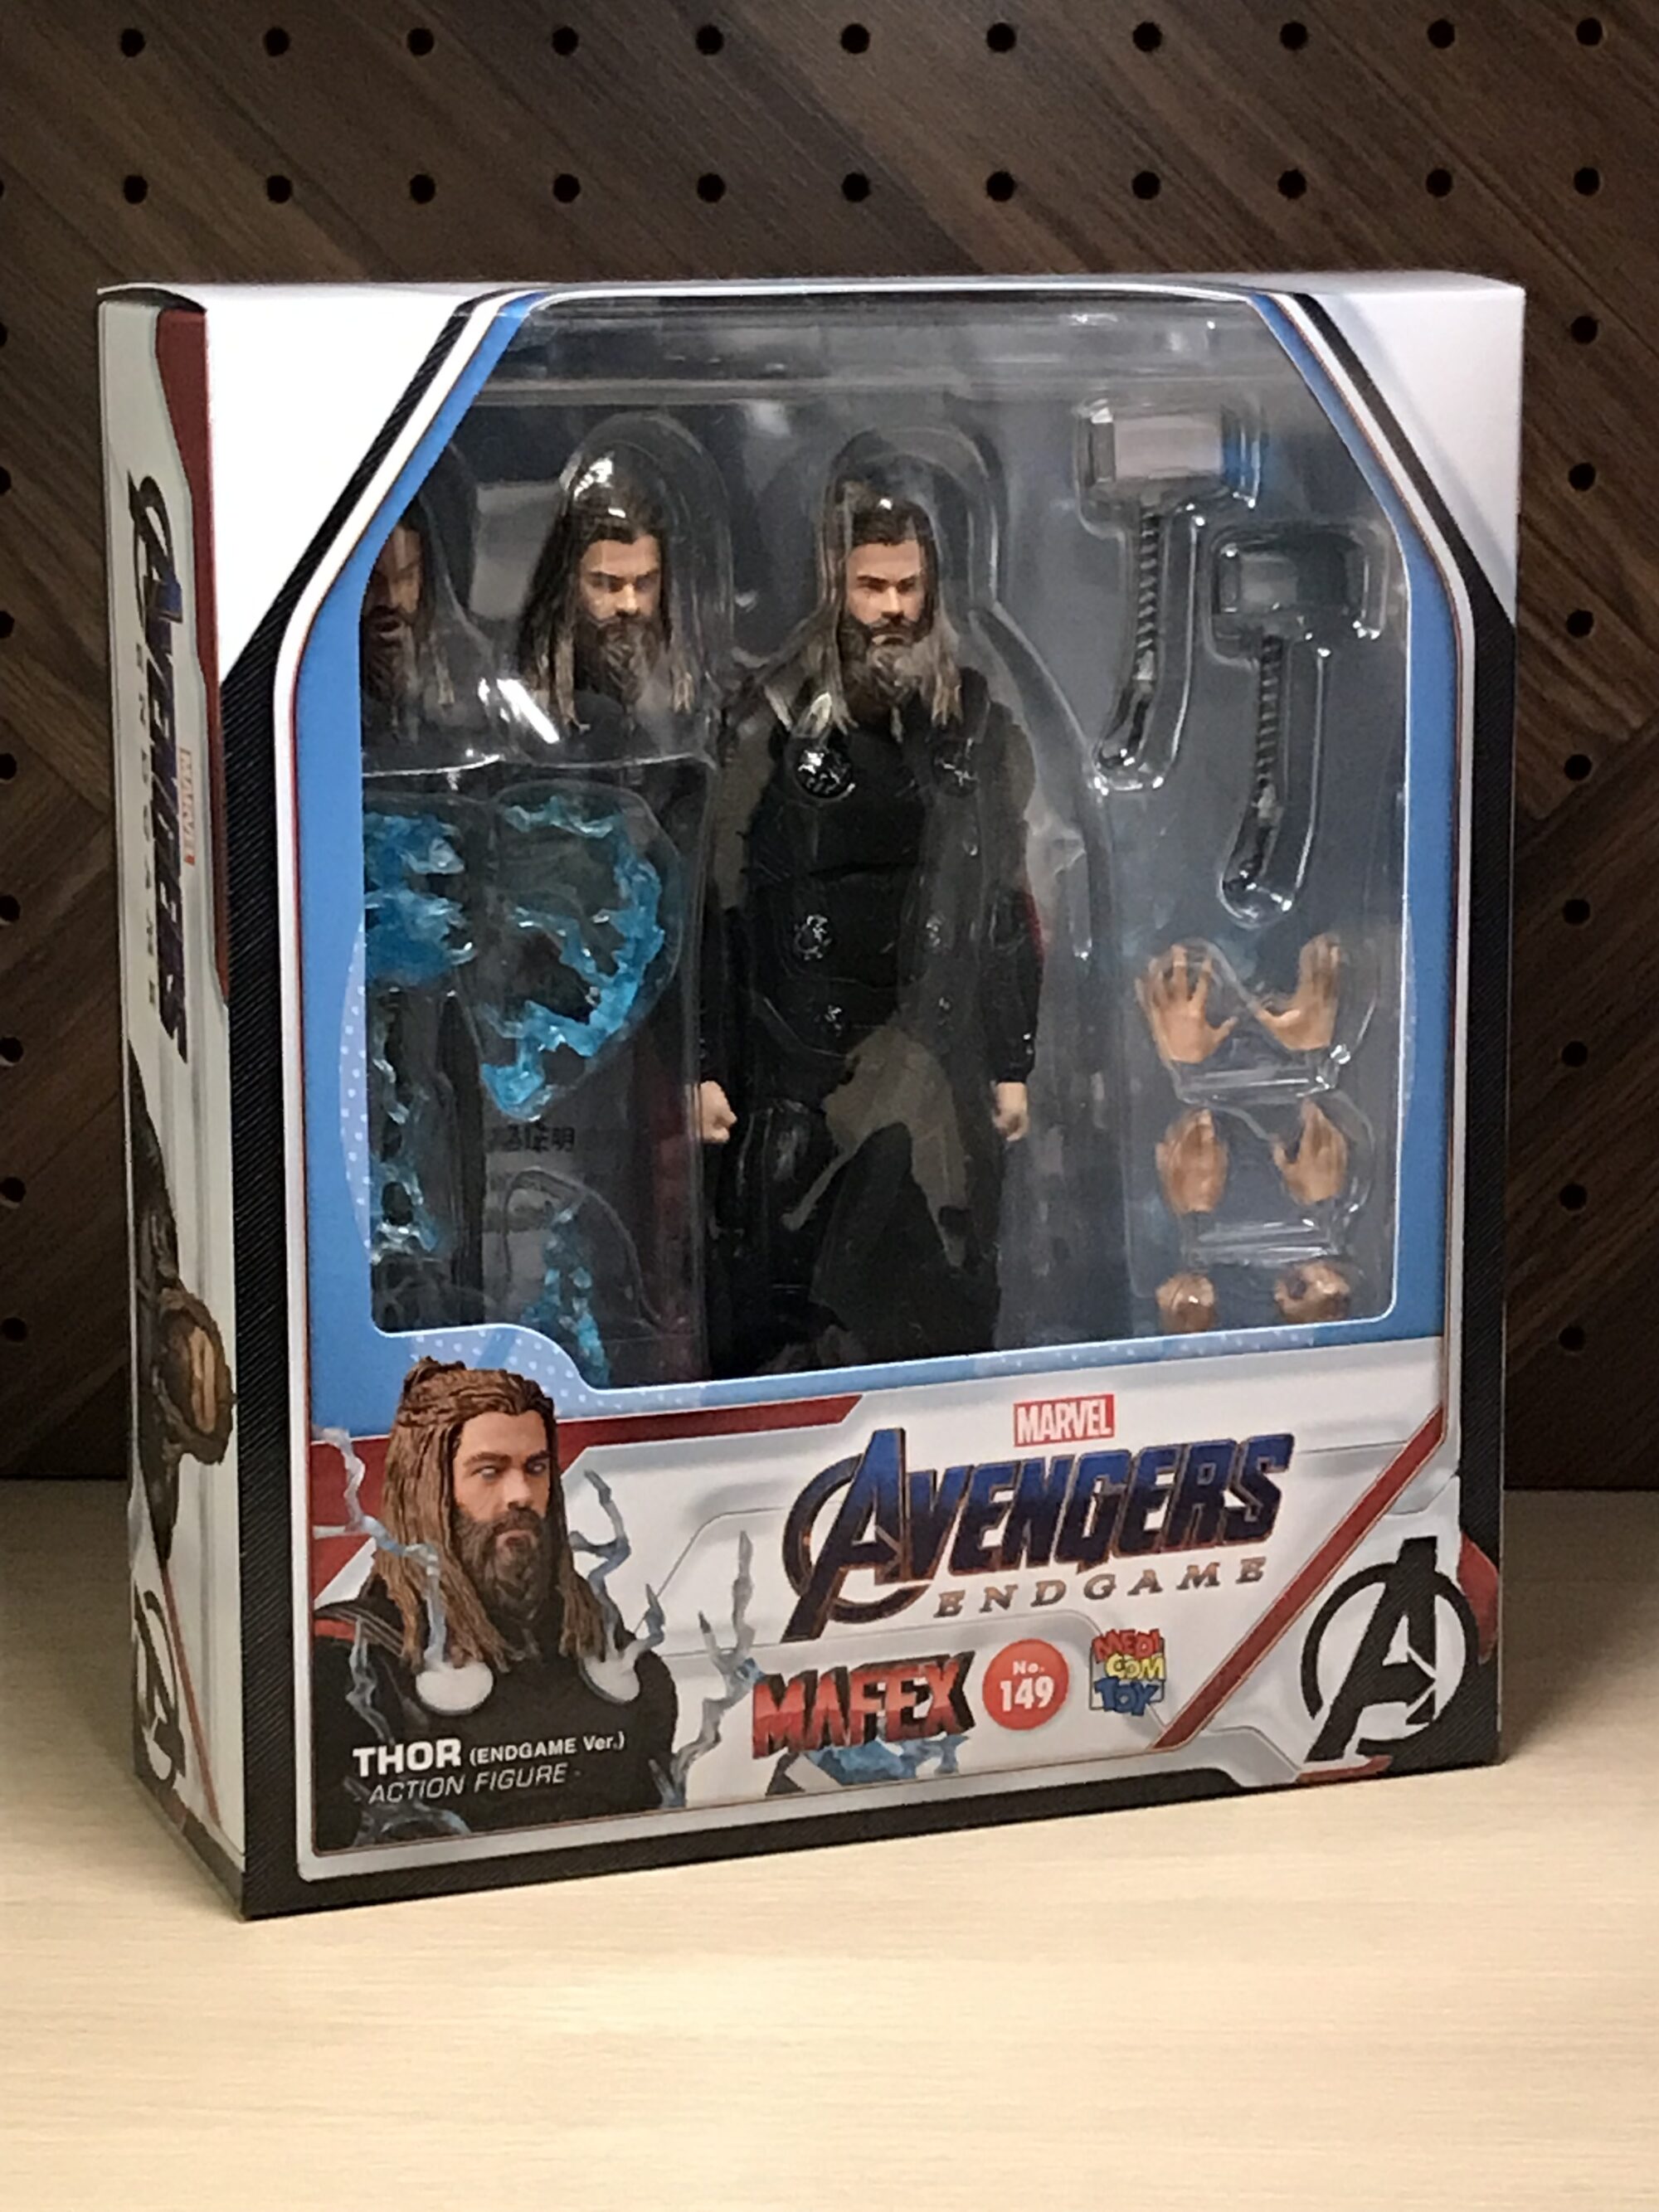 MAFEX ソー (アベンジャーズ エンドゲームver.)レビュー | Toys.Time 